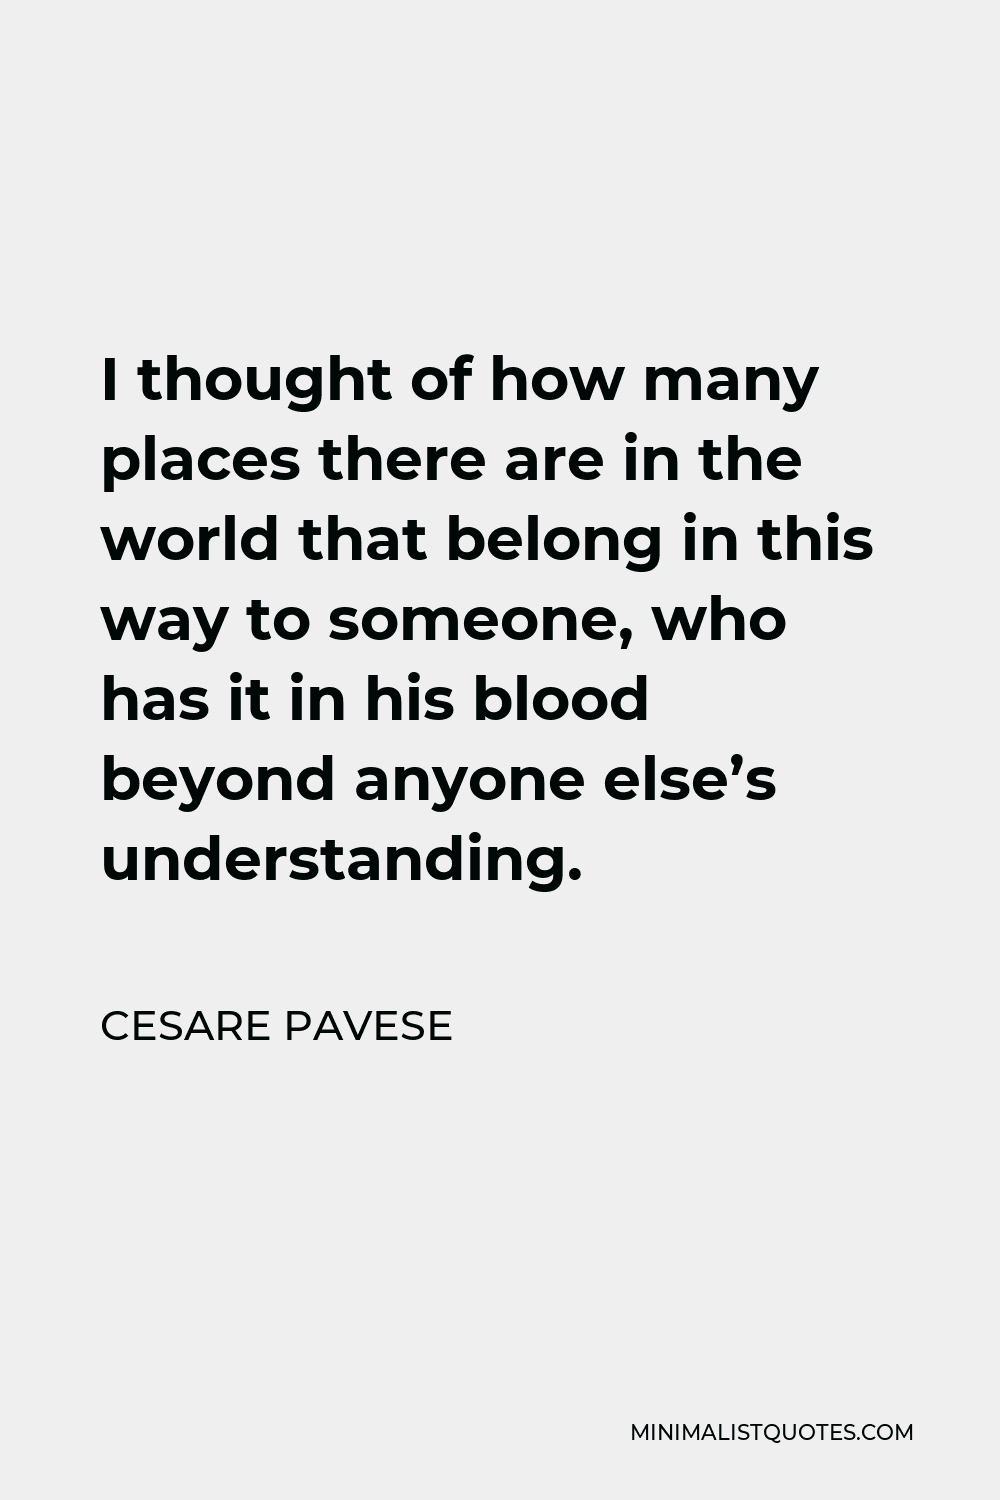 Cesare Pavese Quote - I thought of how many places there are in the world that belong in this way to someone, who has it in his blood beyond anyone else’s understanding.